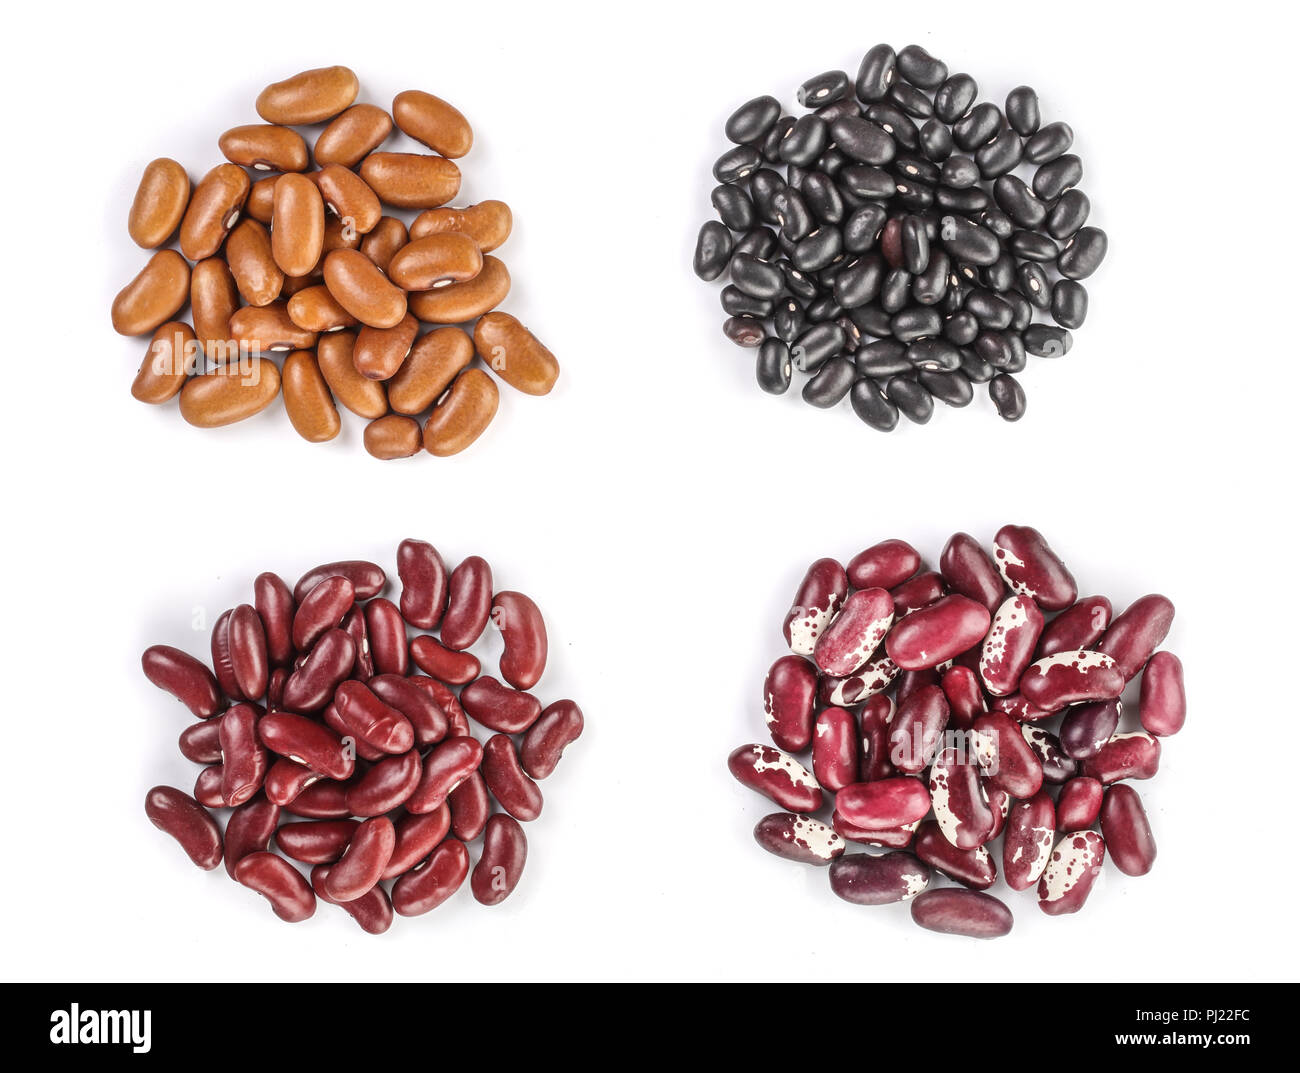 Collection set of Various dried kidney legumes haricot beans, close up isolated on white background. Stock Photo